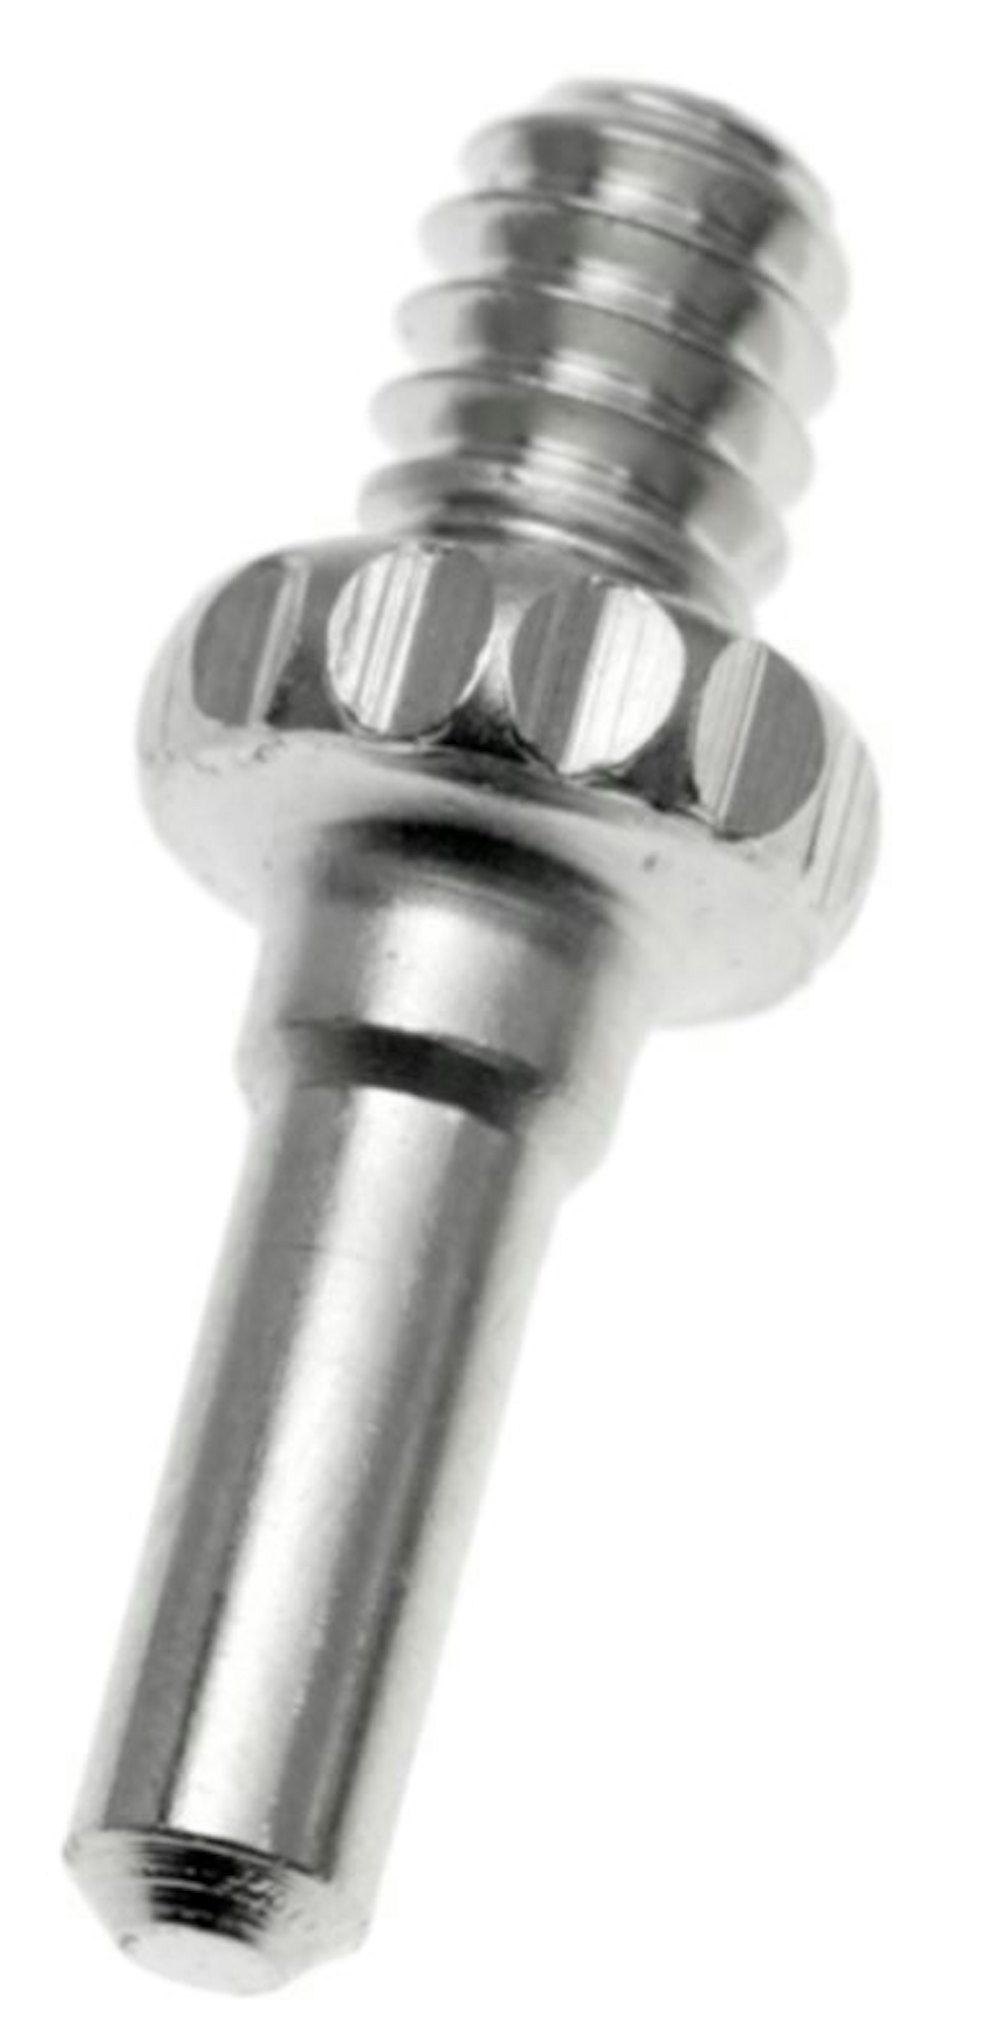 Park CTP Replacement Pin for CT1-CT7